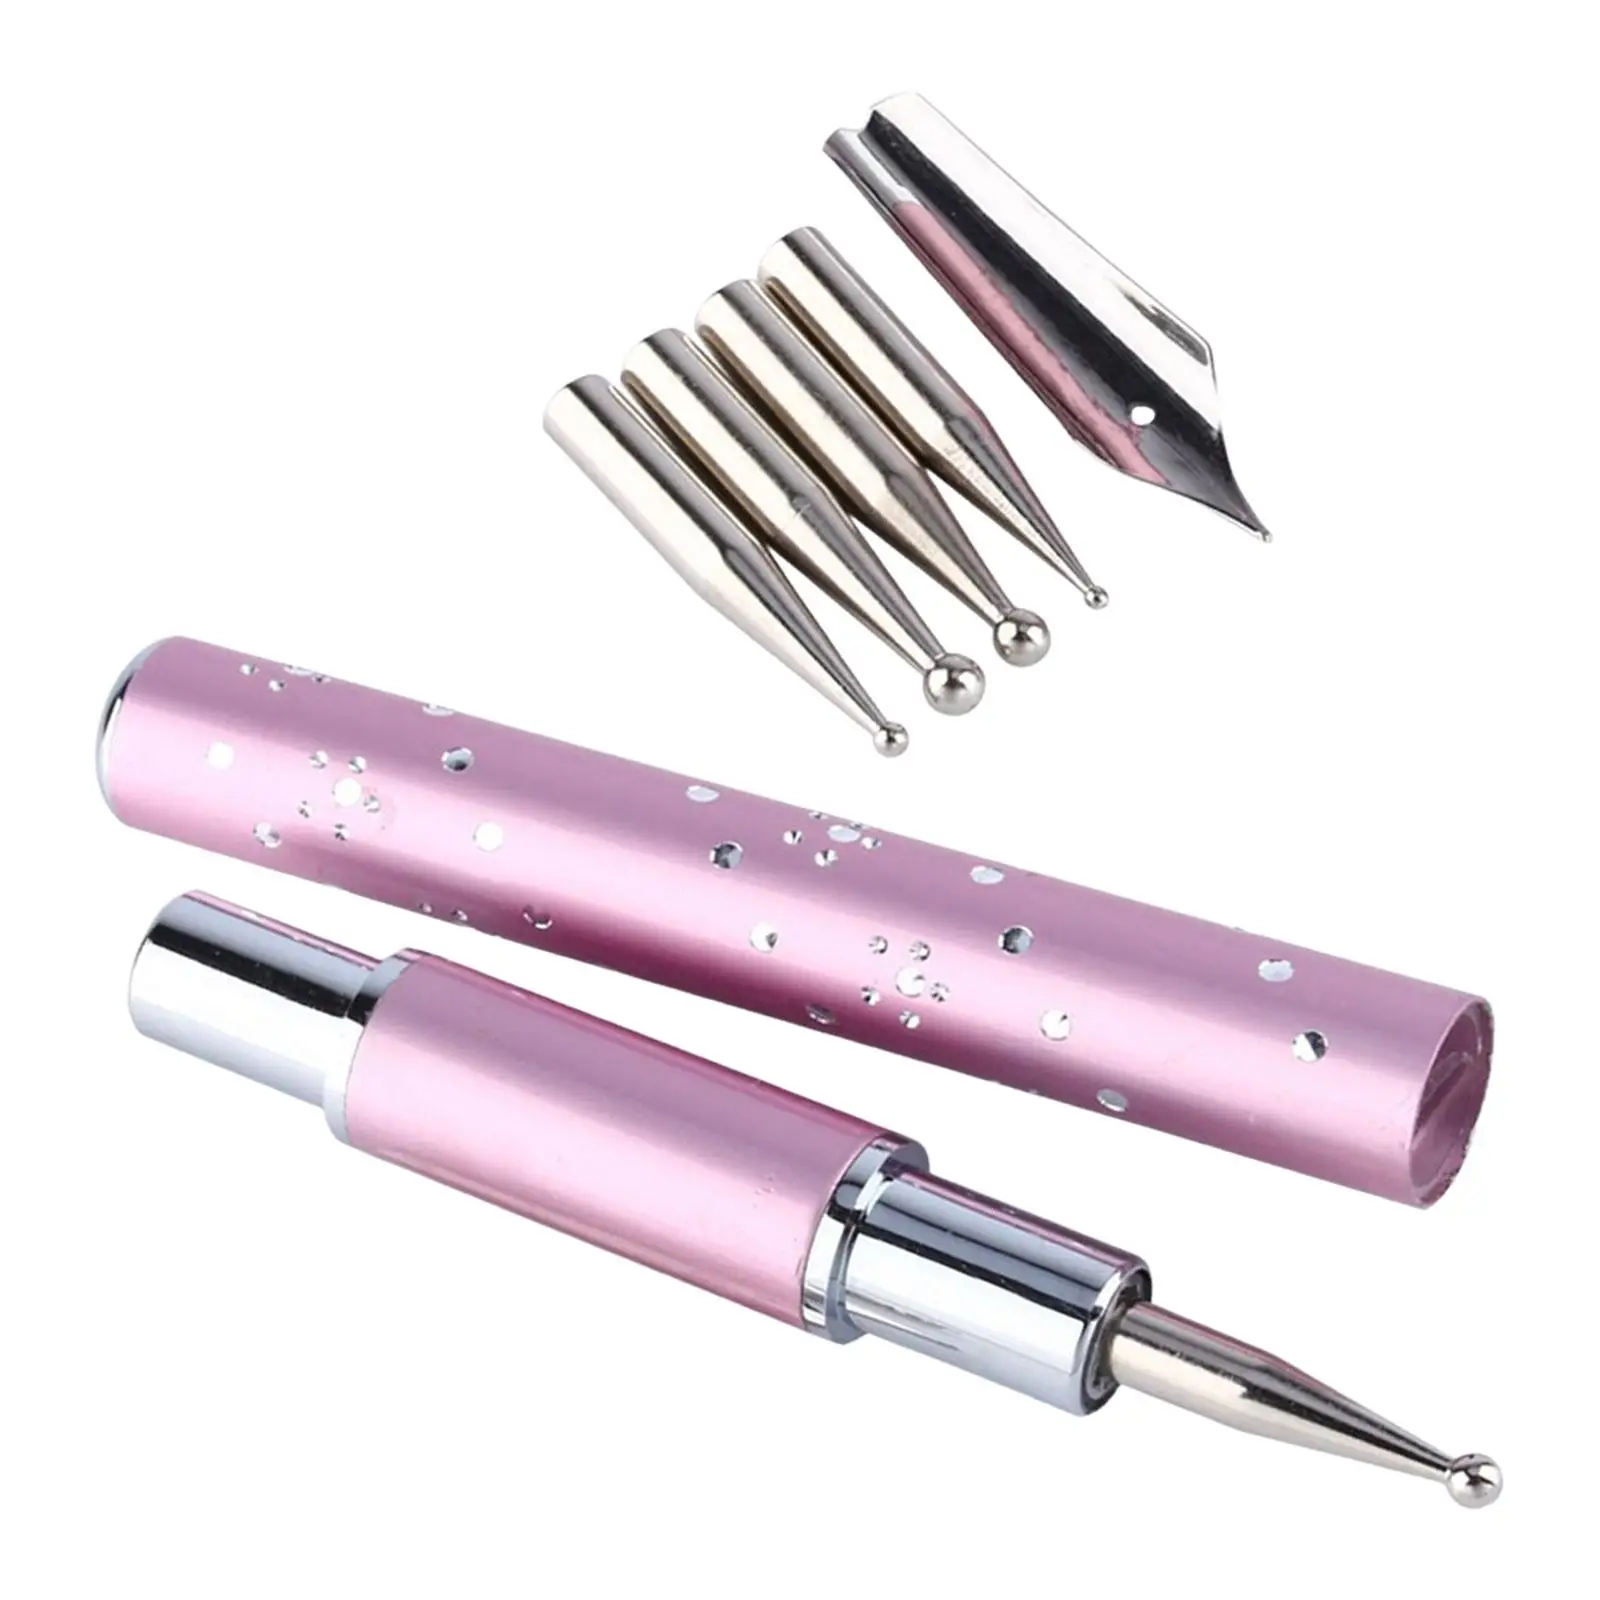 Nail Art Fountain Pen Brush Stainless Steel with 5 Replacement Heads Dotting Liner Tool Nail Art Painting Pen for Salon Home